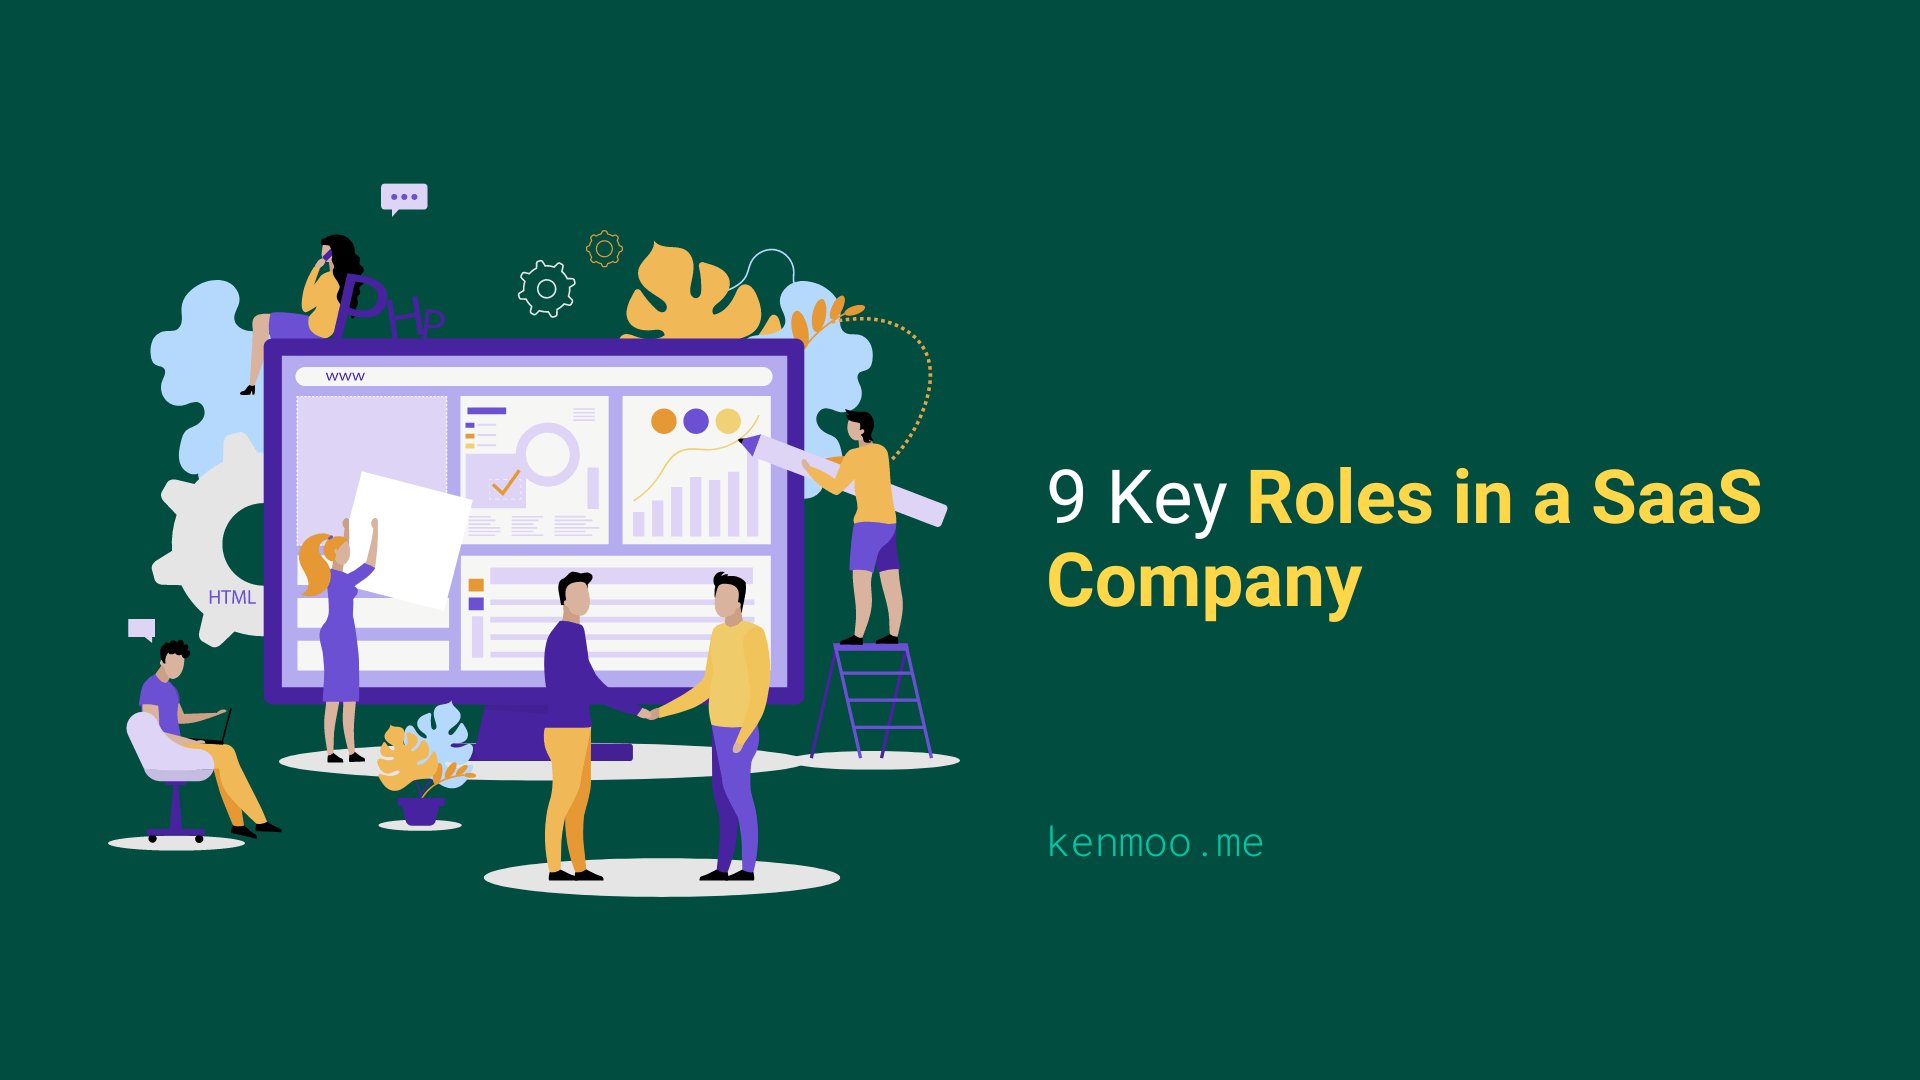 9 Key Roles in a SaaS Company